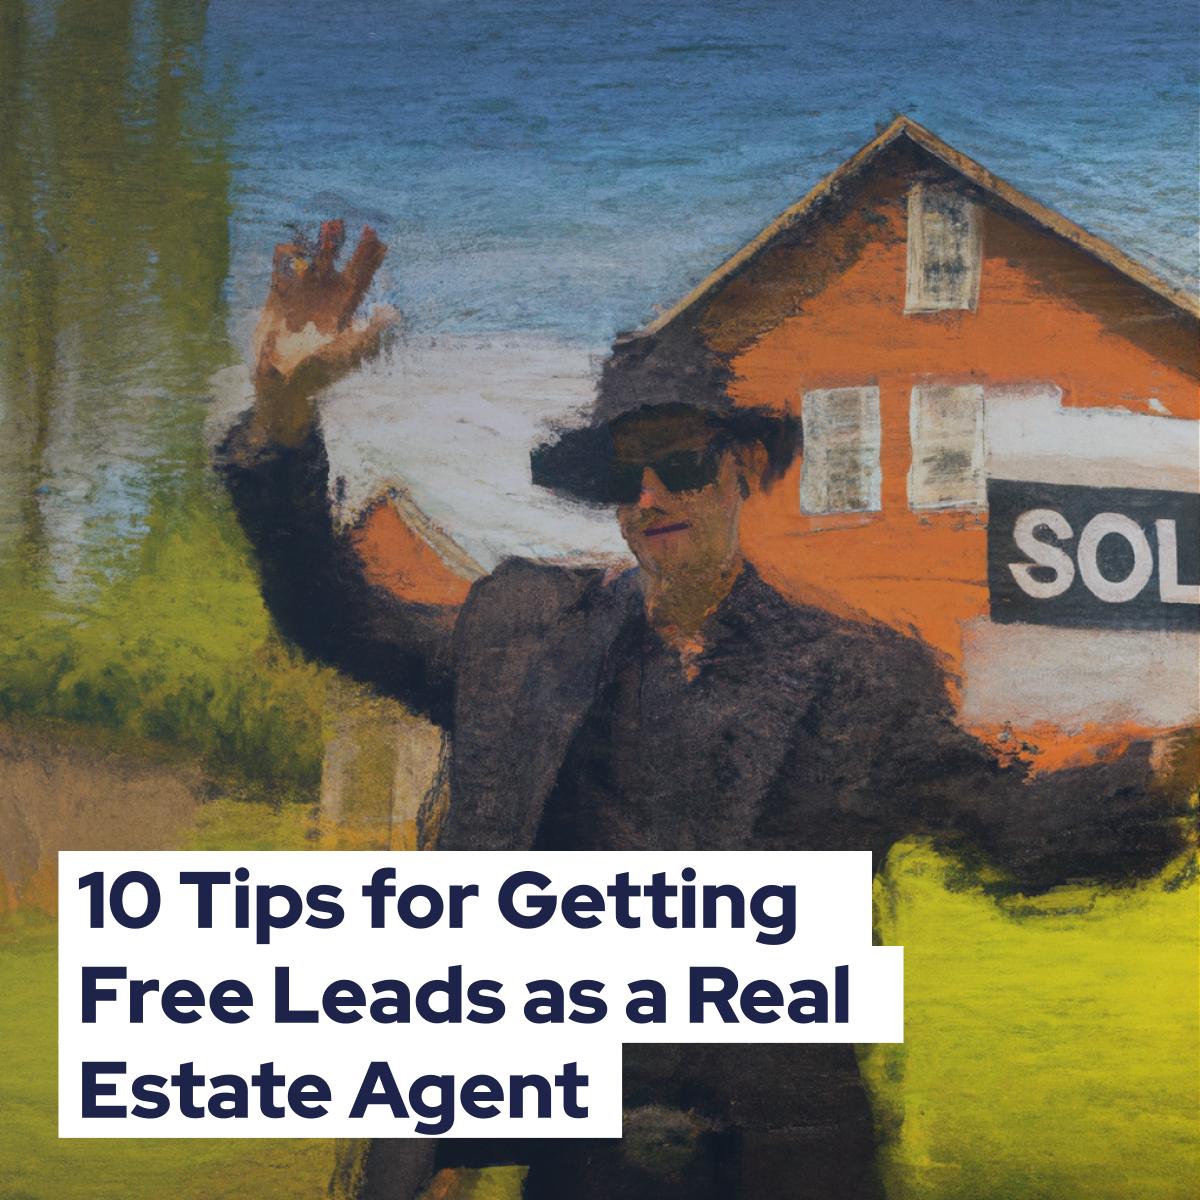 Top 10 Tips for Getting Free Leads as a Real Estate Agent